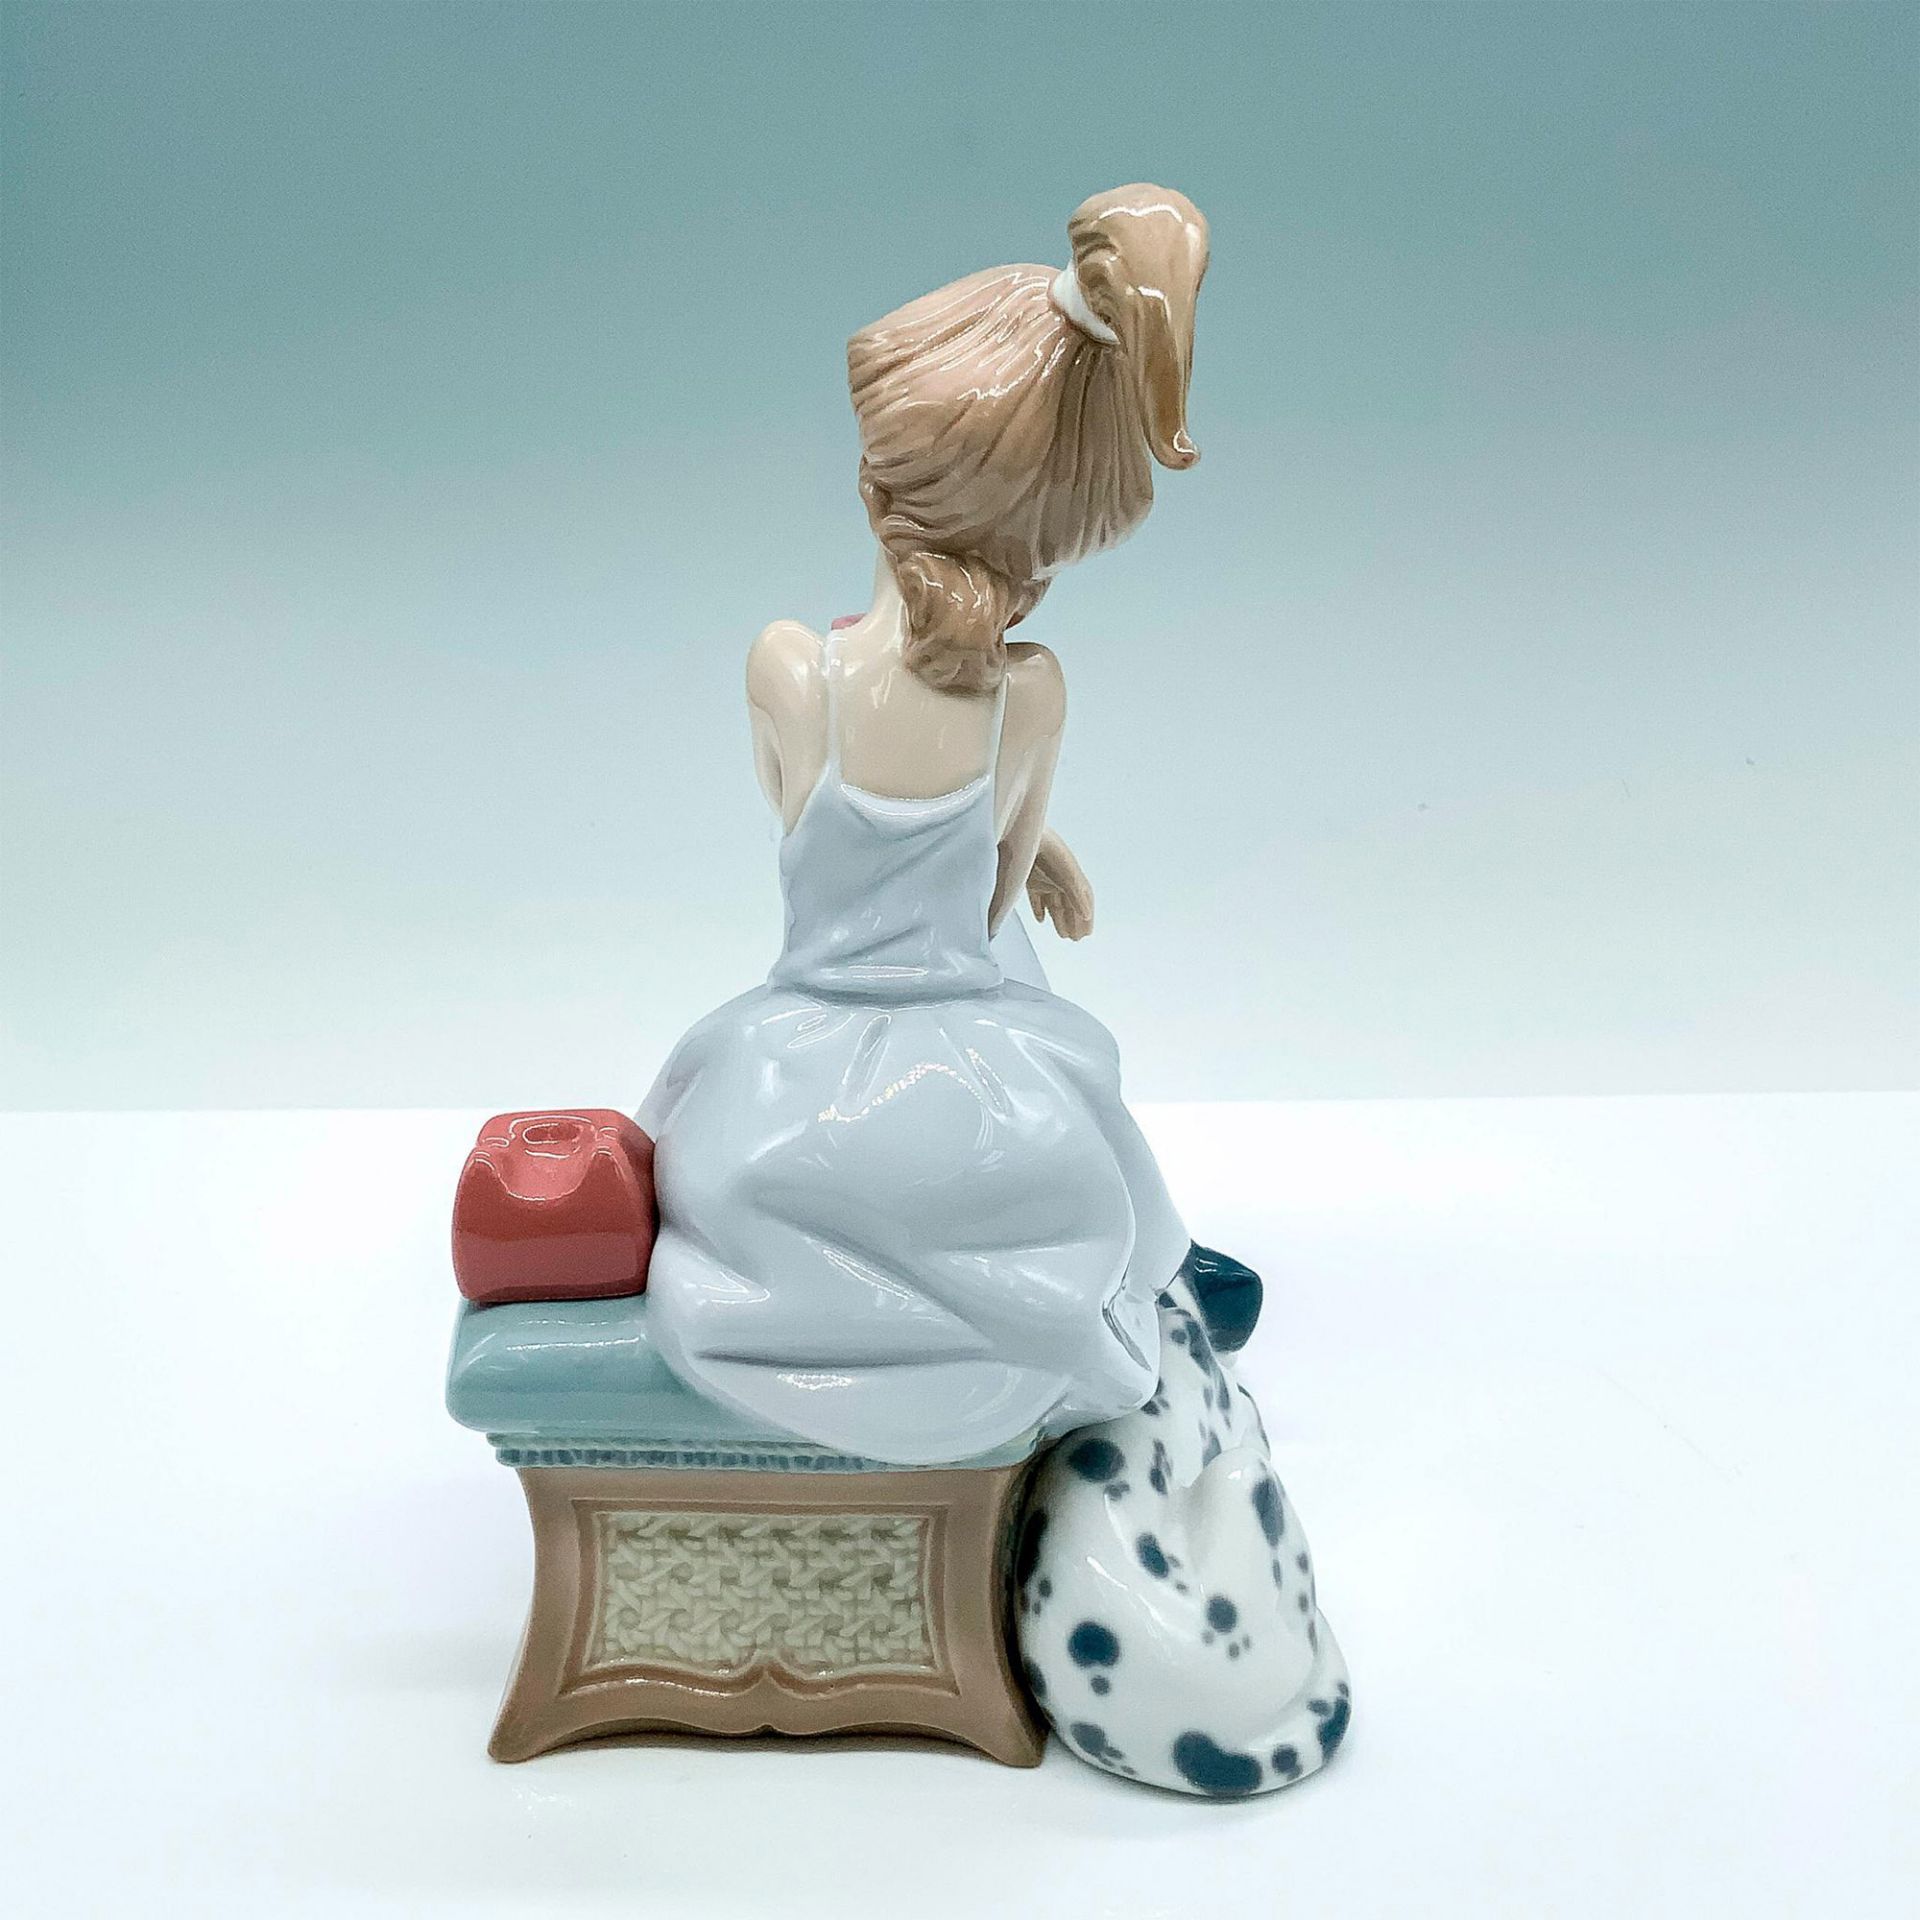 Chit-chat 1005466 - Lladro Porcelain Figurine - Image 4 of 5